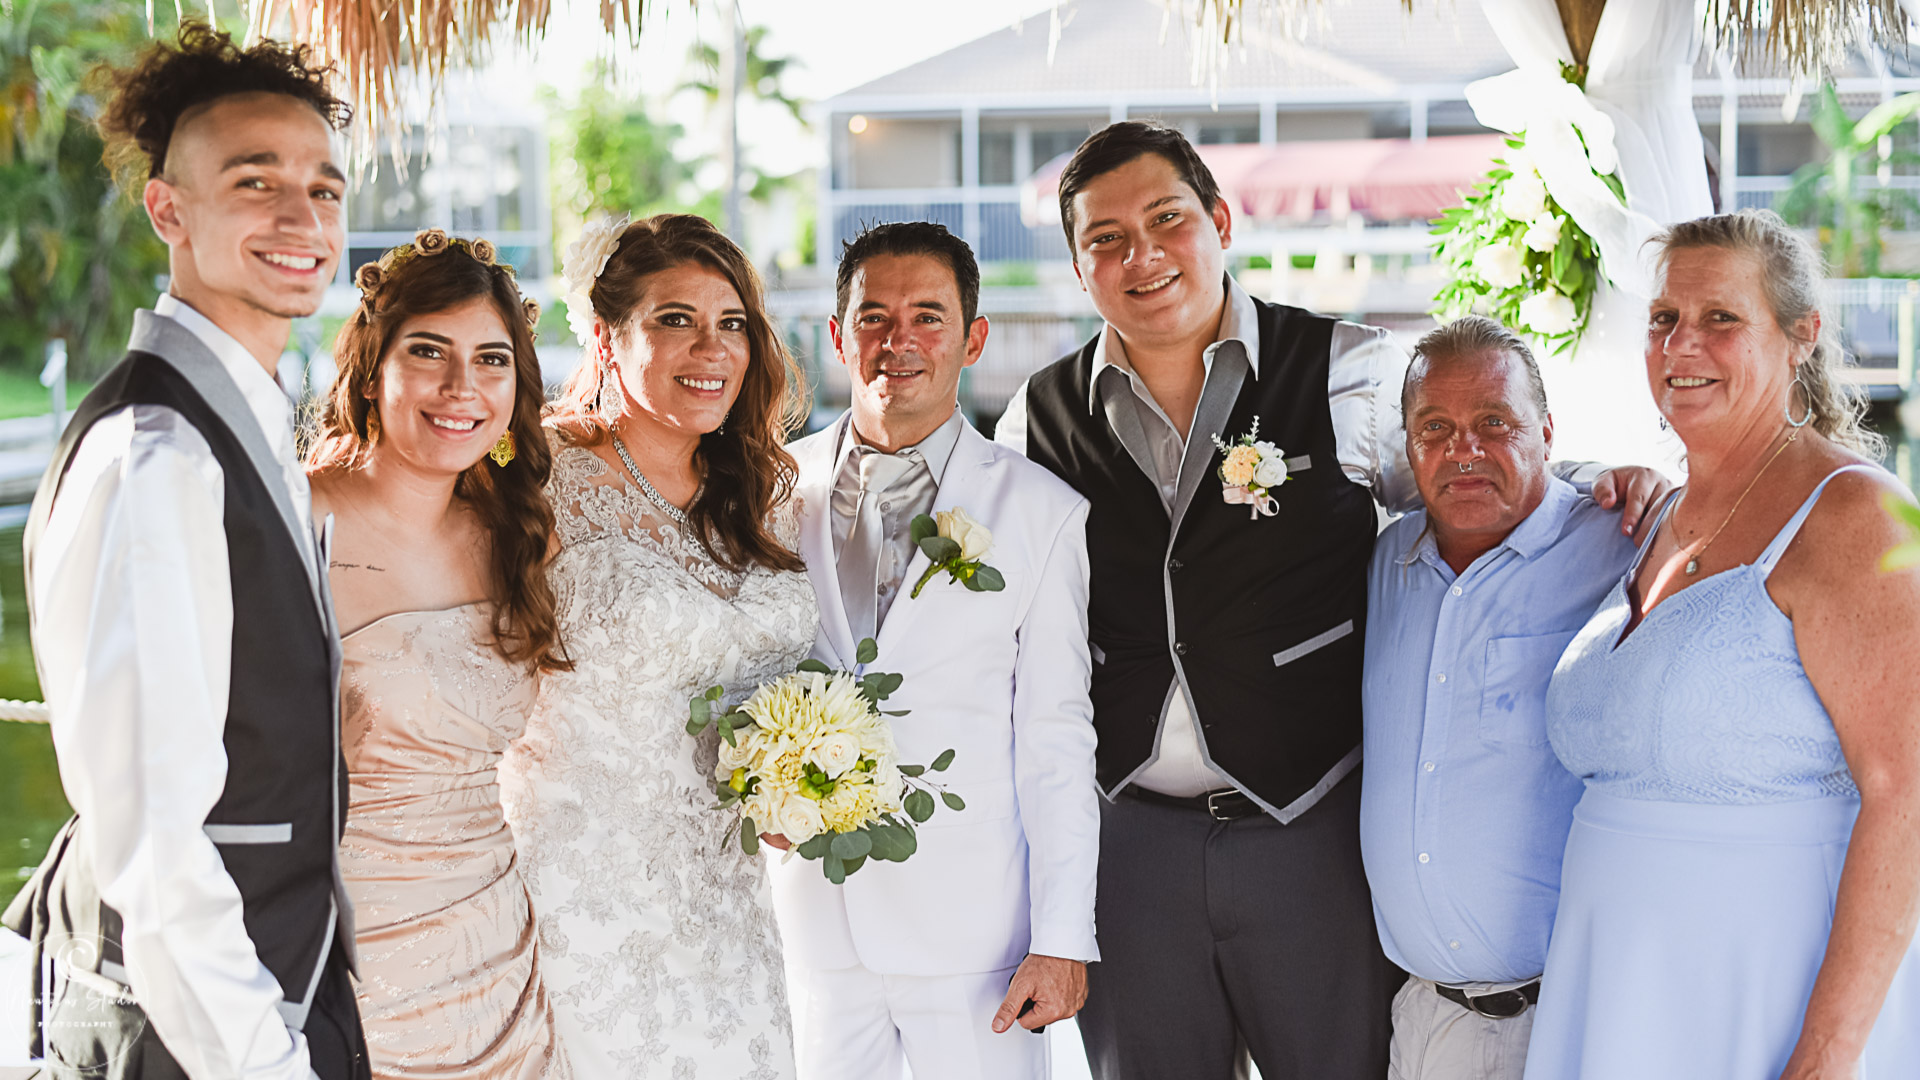 Group photo of small wedding in Florida